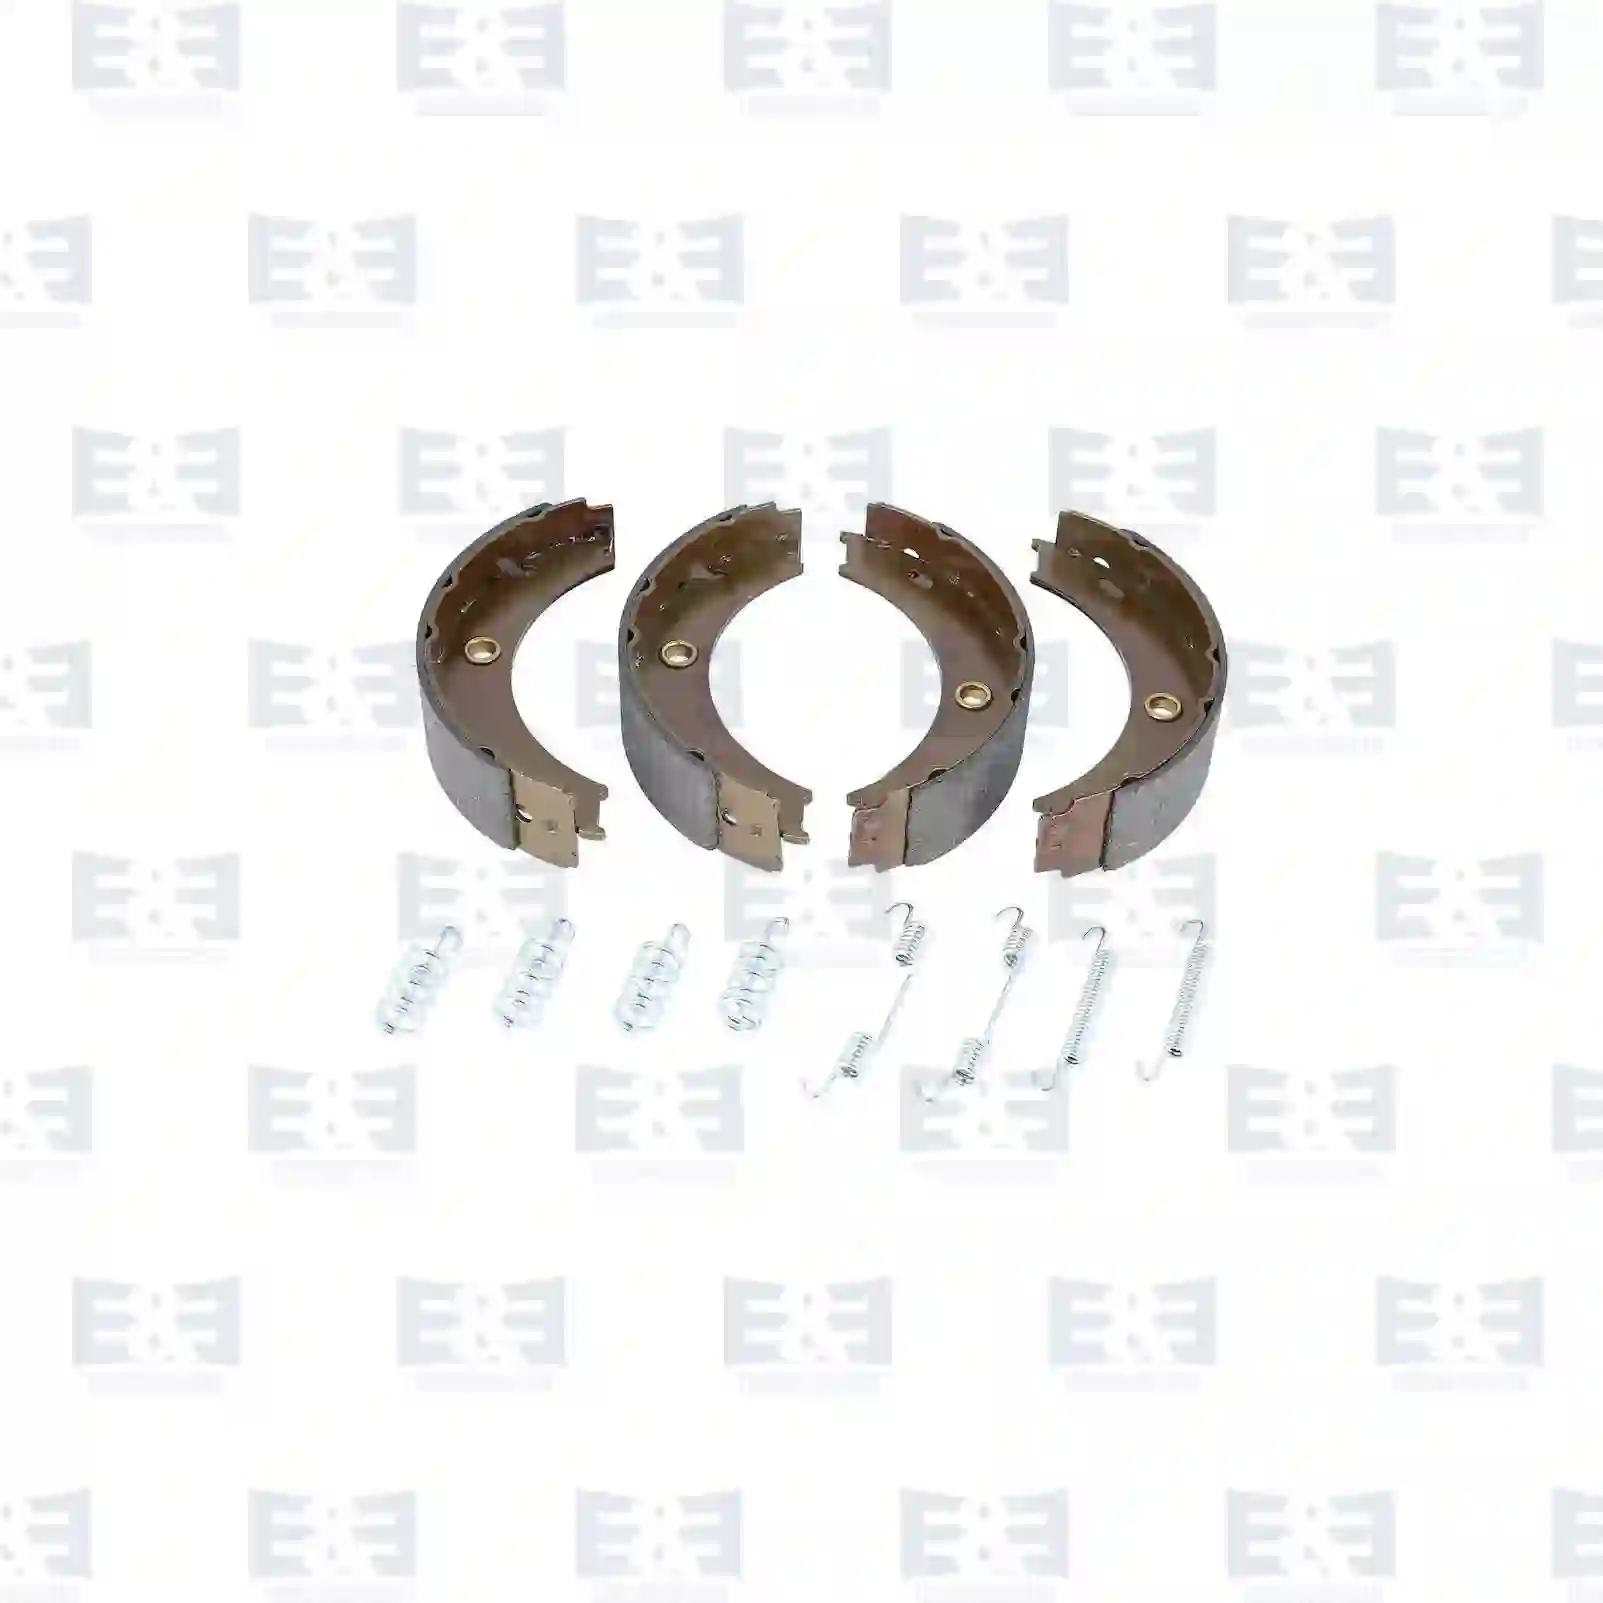 Brake shoe kit, with linings, 2E2295360, 0024205920, 9044200220, 9044200320, 9044200420, 2D0609525A, 2D0609538A, 2D0698525A ||  2E2295360 E&E Truck Spare Parts | Truck Spare Parts, Auotomotive Spare Parts Brake shoe kit, with linings, 2E2295360, 0024205920, 9044200220, 9044200320, 9044200420, 2D0609525A, 2D0609538A, 2D0698525A ||  2E2295360 E&E Truck Spare Parts | Truck Spare Parts, Auotomotive Spare Parts